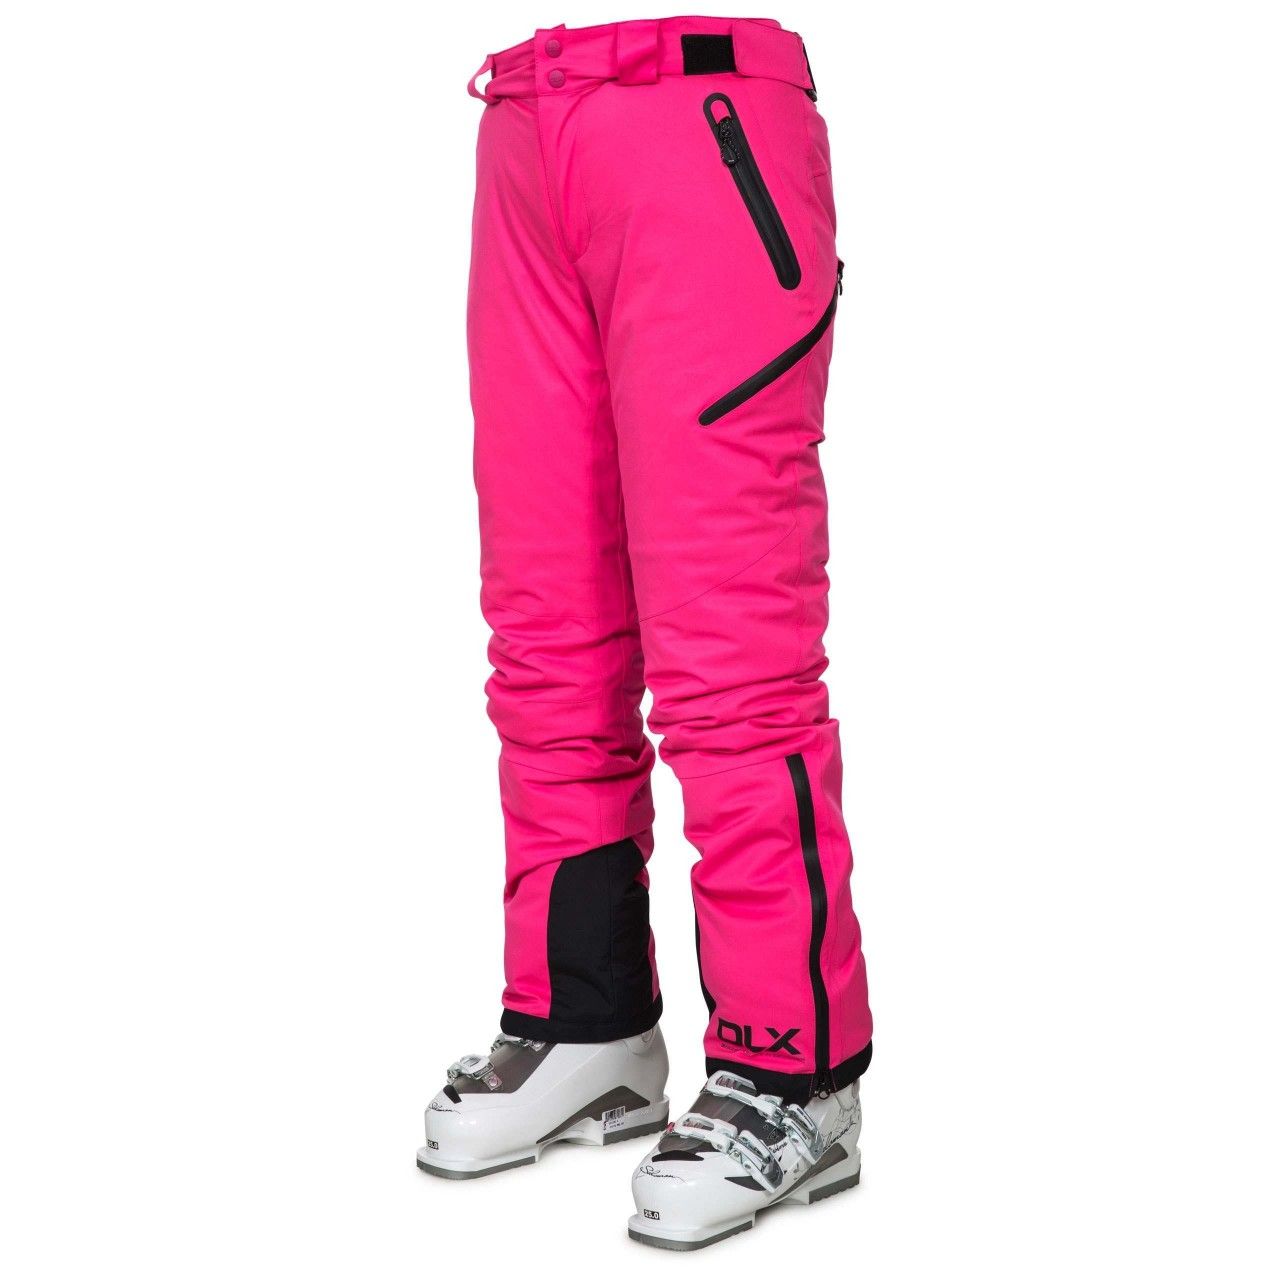 Stretch fabric. Down touch filling. Tricot lined. Kick panels. Adjustable detachable braces. Adjustable waist. Ankle gaiters. Waterproof ankle zips. Articulated knee darts. 3 waterproof zip pockets. Side leg ventilation with waterproof zips. Waterproof 20000mm, breathable 10000mvp, windproof, taped seams. Shell: 100% Polyester, PU membrane, Lining: 100% Polyamide/100% Polyester, Filling: 100% Polyester. Trespass Womens Waist Sizing (approx): XS/8 - 25in/66cm, S/10 - 28in/71cm, M/12 - 30in/76cm, L/14 - 32in/81cm, XL/16 - 34in/86cm, XXL/18 - 36in/91.5cm.